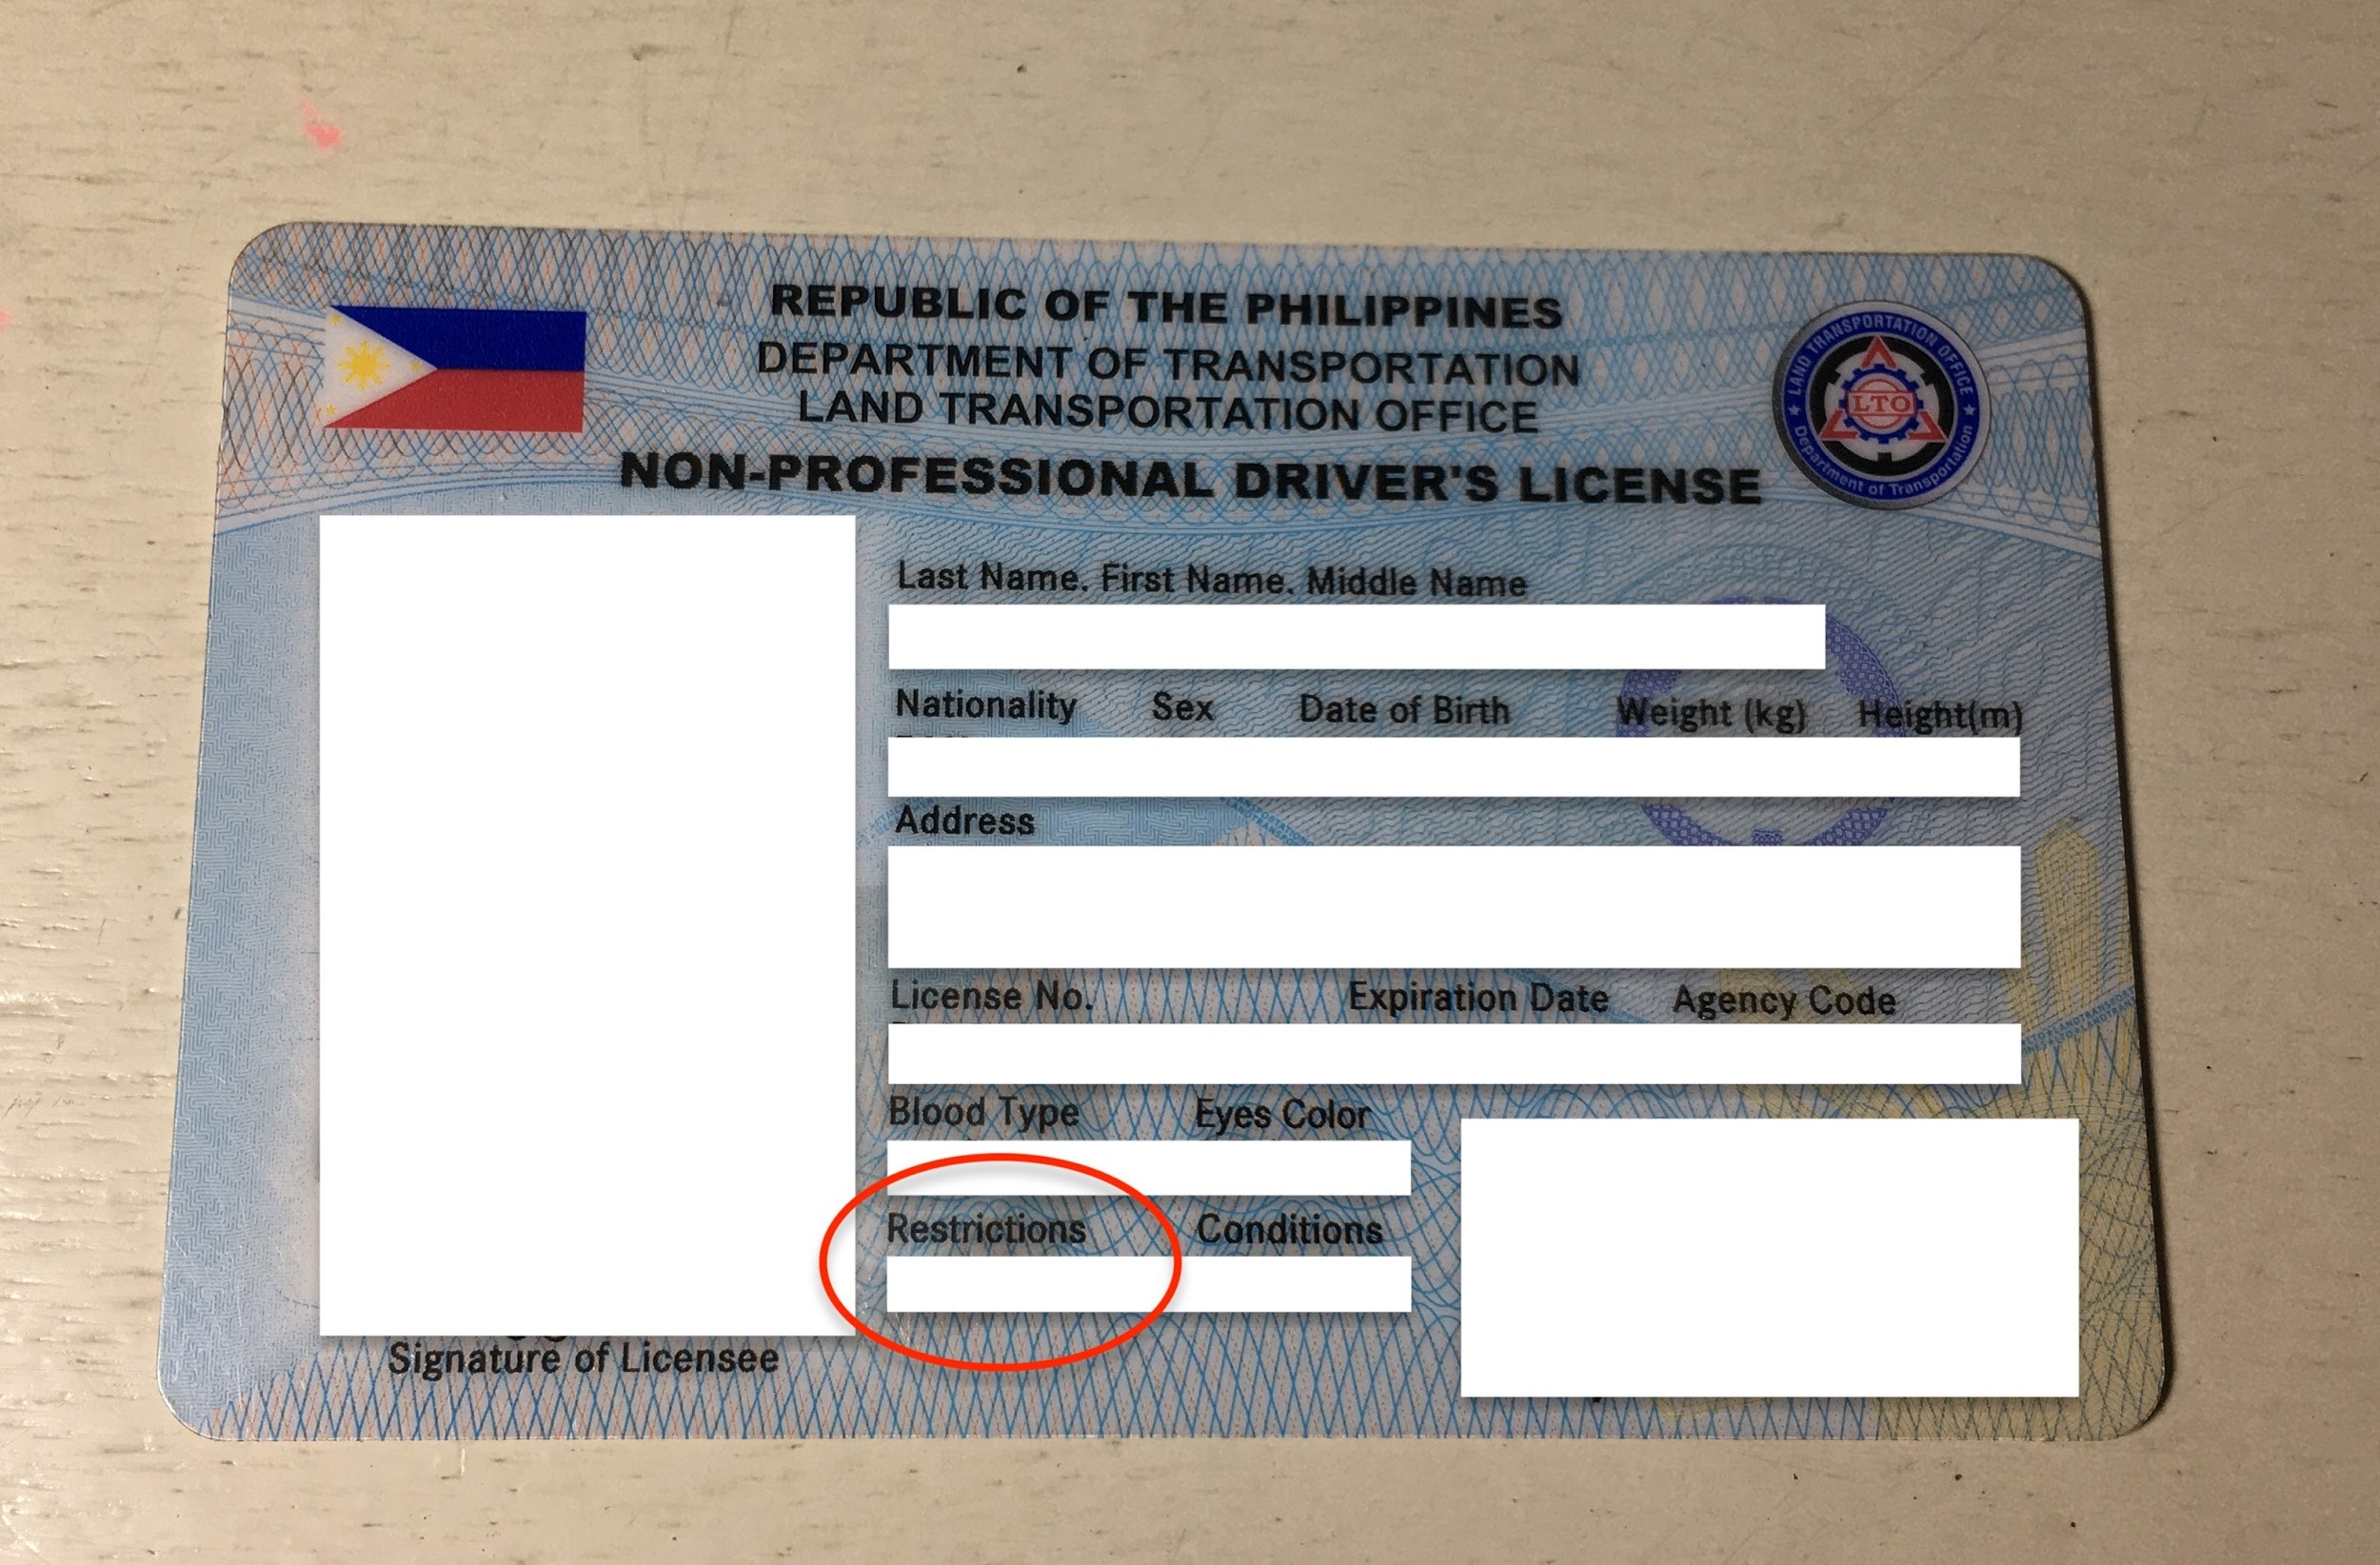 A Guide On How To Add Restriction Codes To Your Drivers License